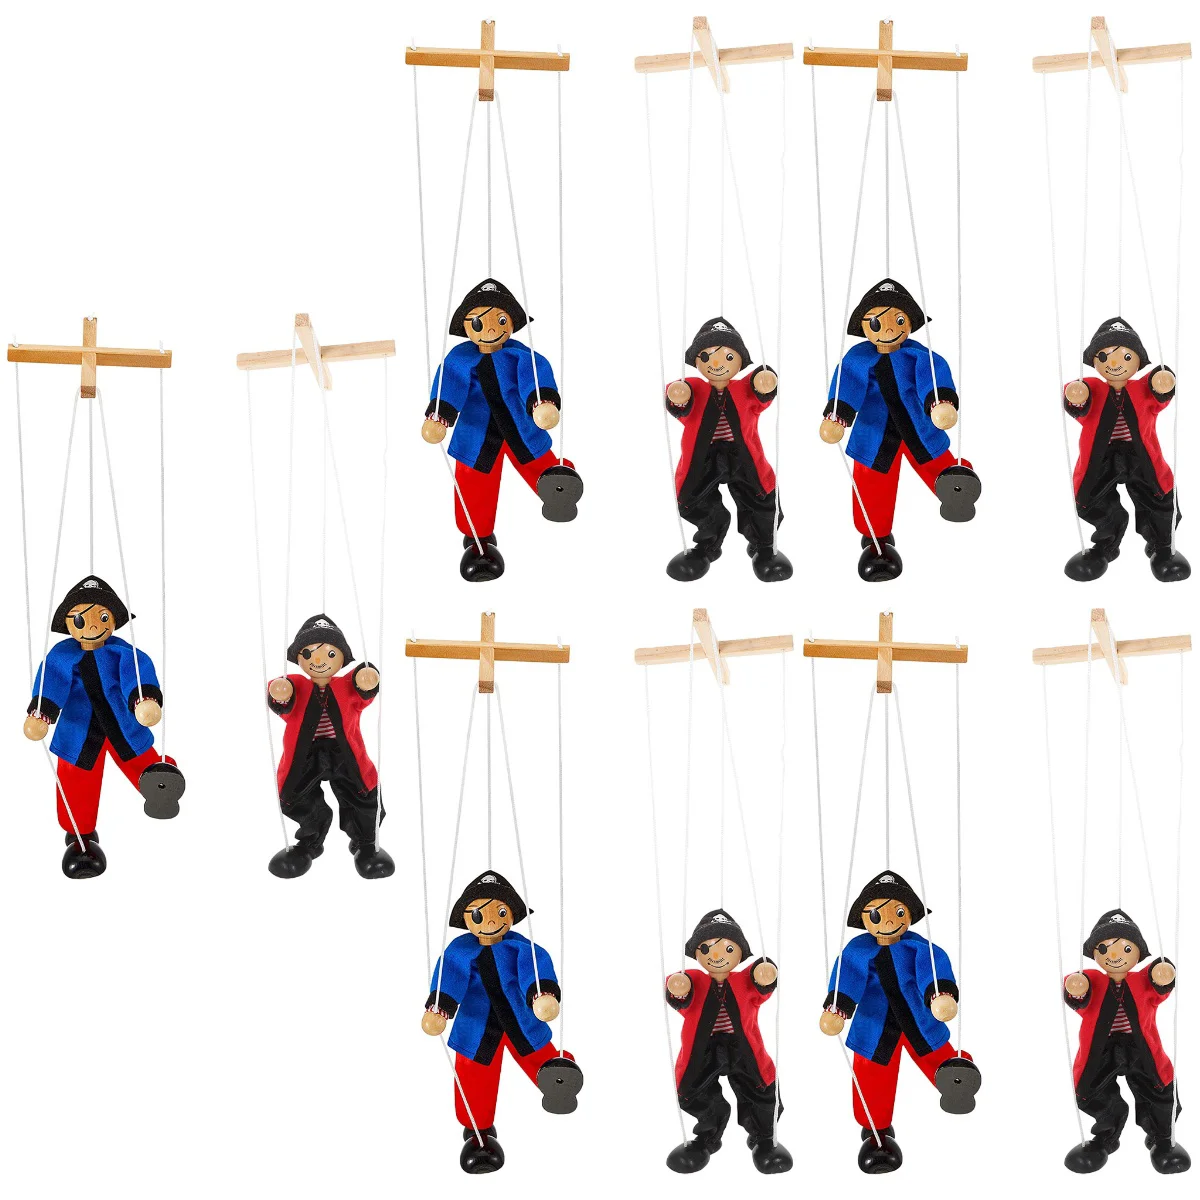 

10 pcs Cartoon Pull String Puppet Delicate Wooden Pirate Marionette Stage Performance Marionette Prop